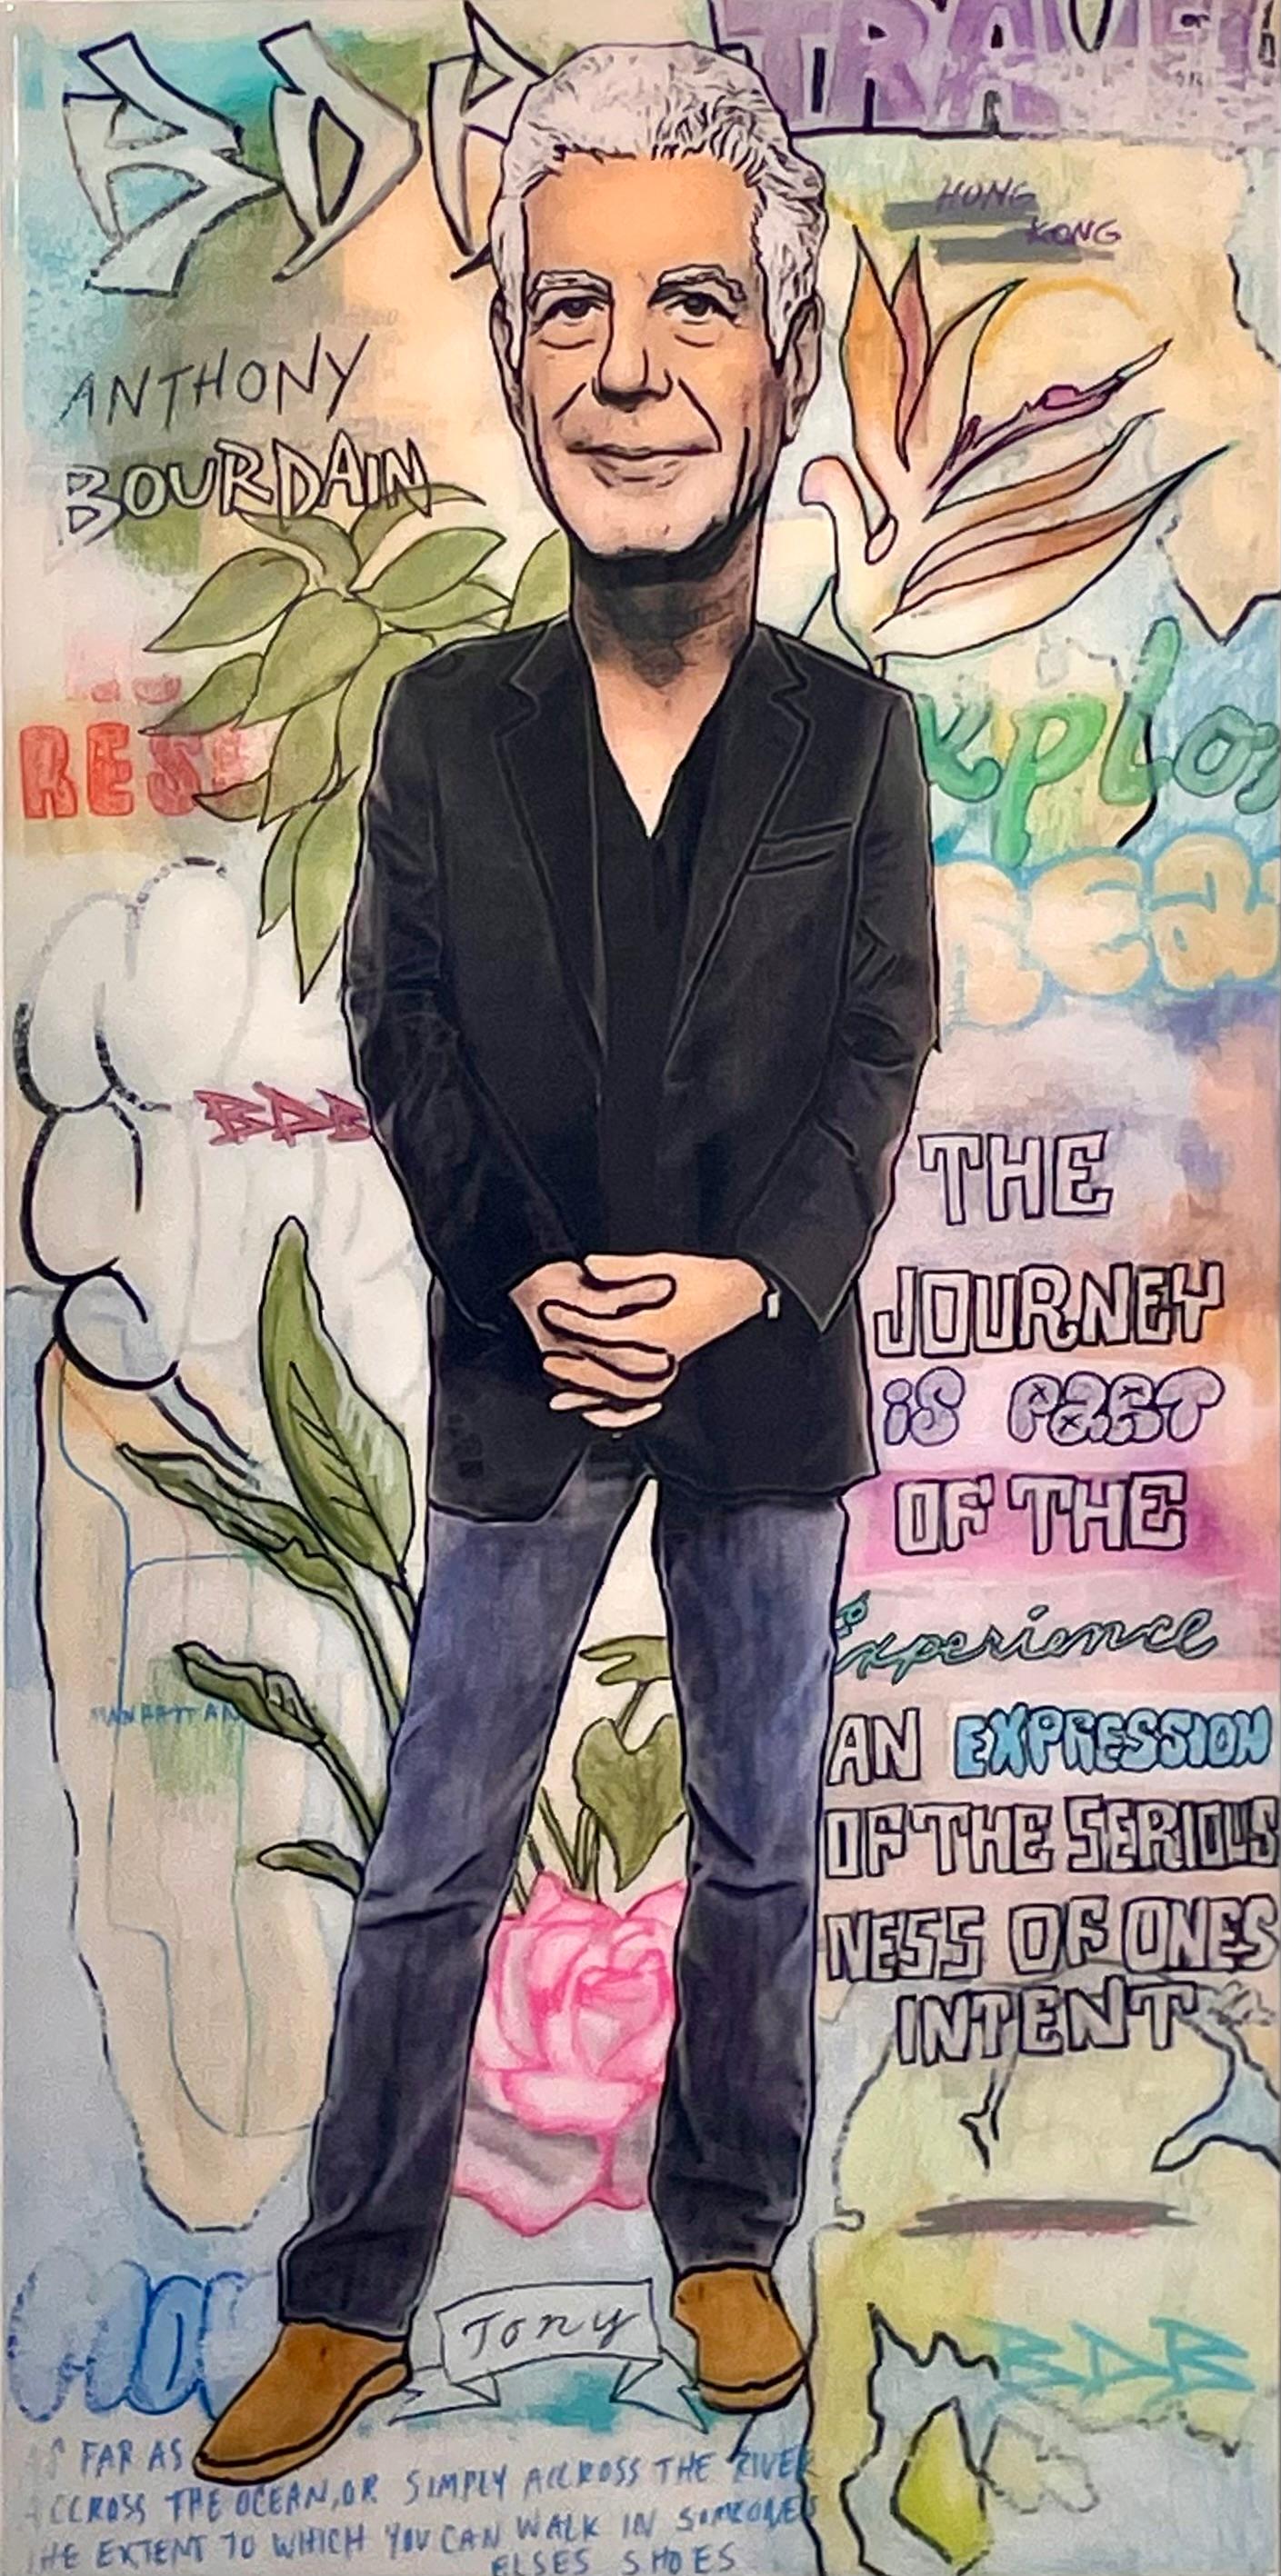 Anthony Bourdain  - Painting by The Producer BDB